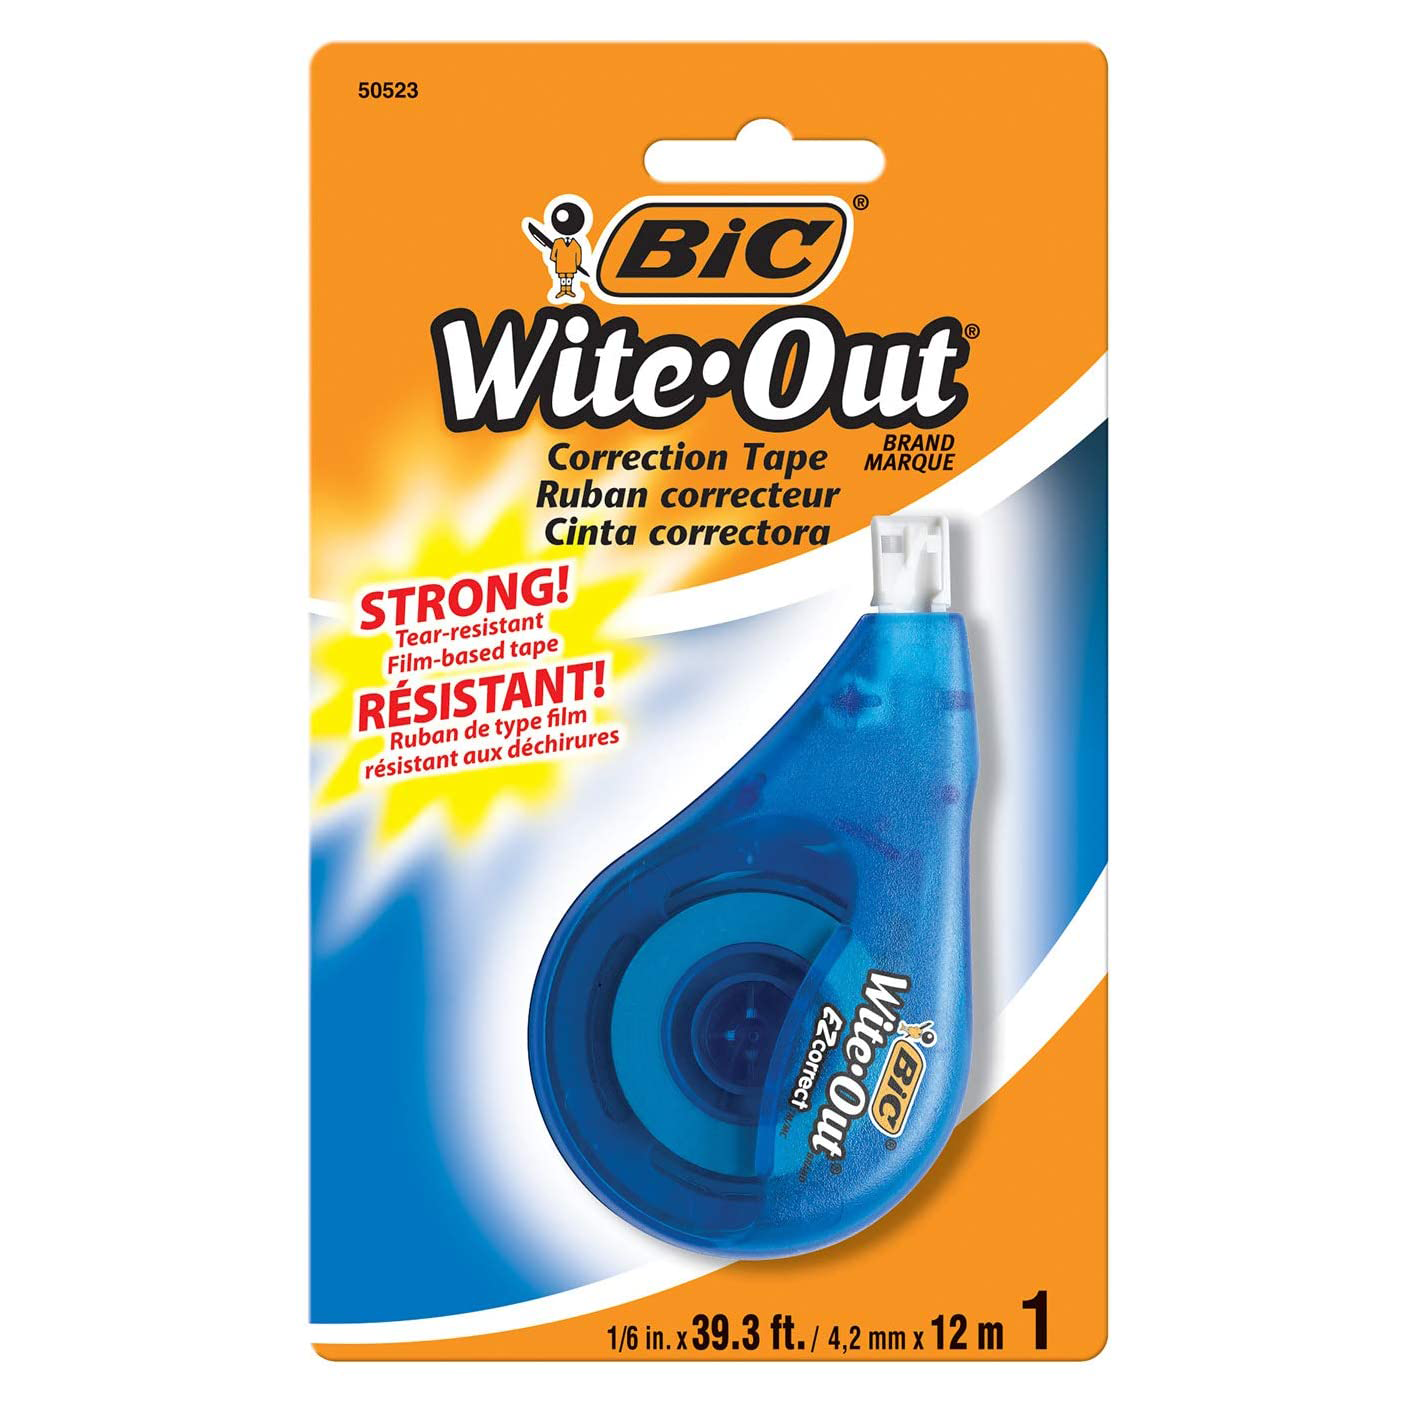 BIC Correction Tape Wite Out 4.2mm x 12m Hangsell